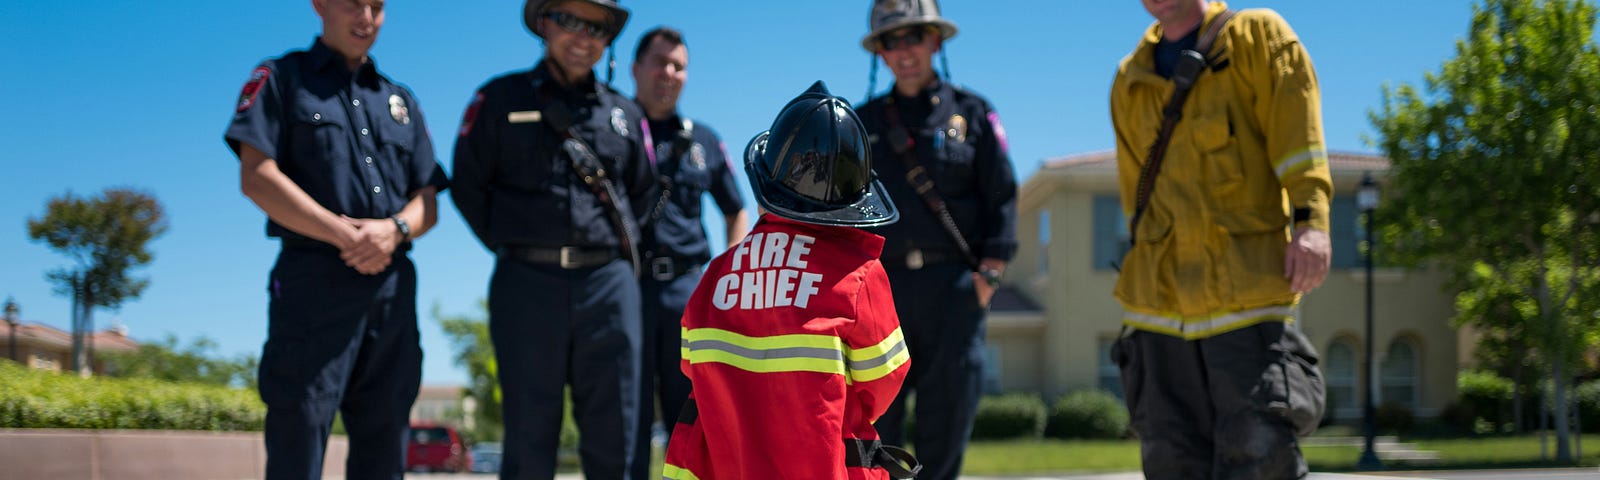 Young child in a Fire Chief costume with some firemen listening.